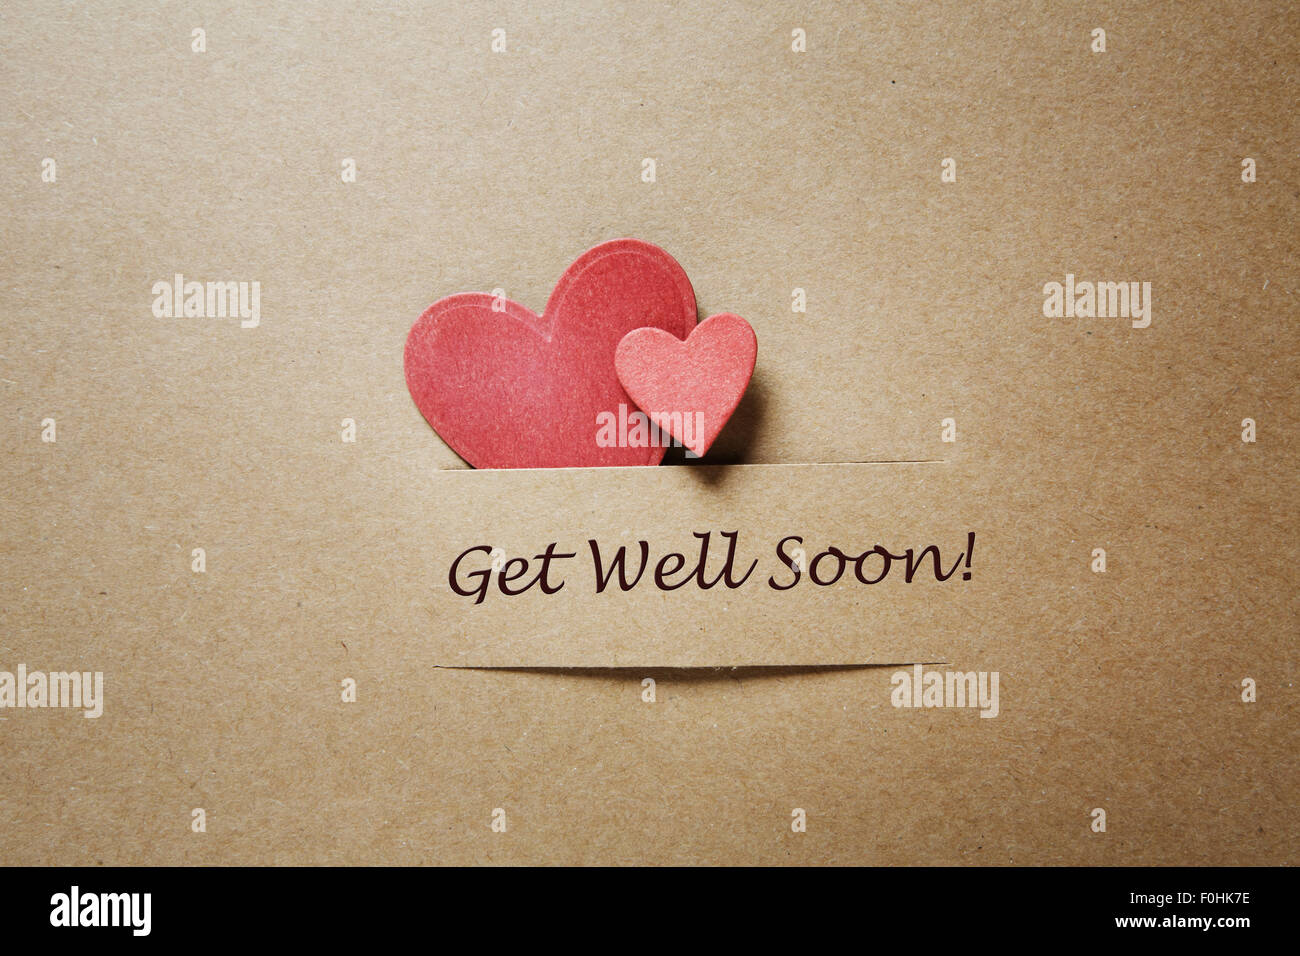 Get Well Soon message with red paper hearts Stock Photo